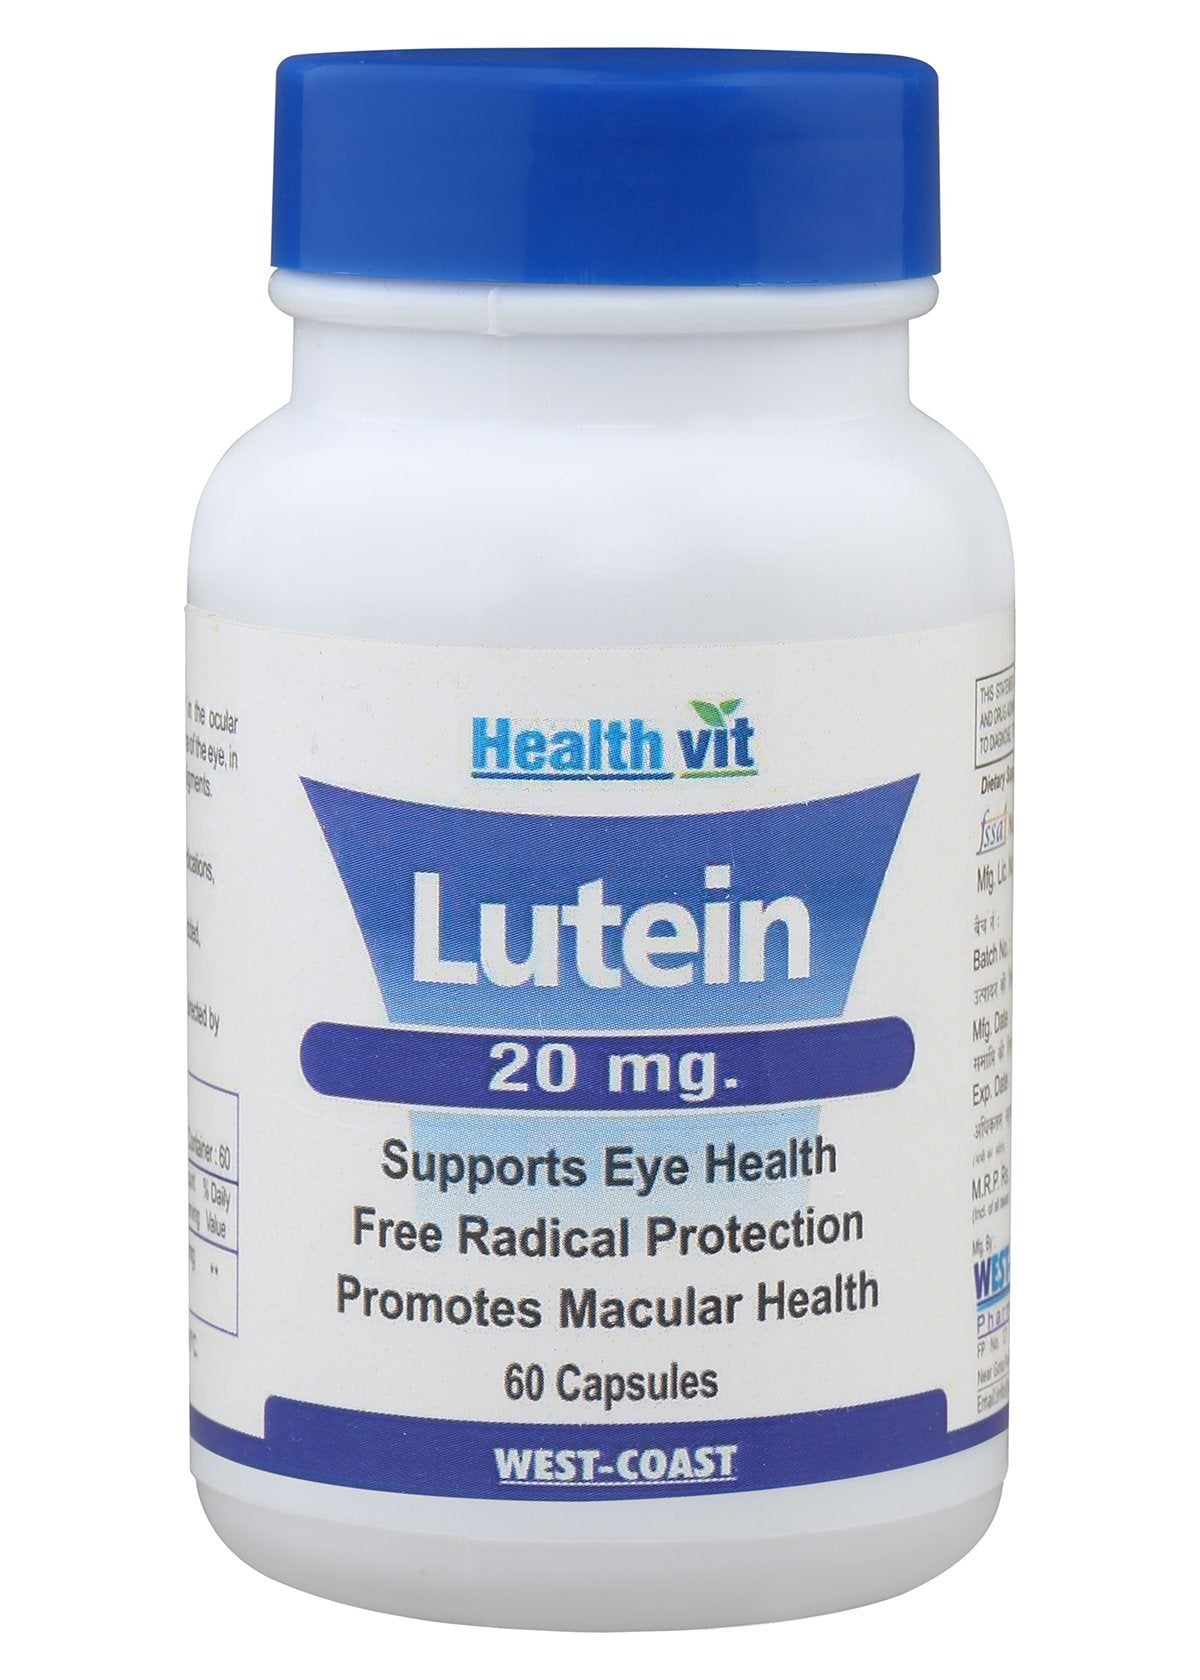 Healthvit Lutein 20mg Nutrition For Eye And Vision | Support Eye Health | Promotes Maculuar Health | Provides Free Radical Protection | Vegan And Gluten Free | 60 Capsules